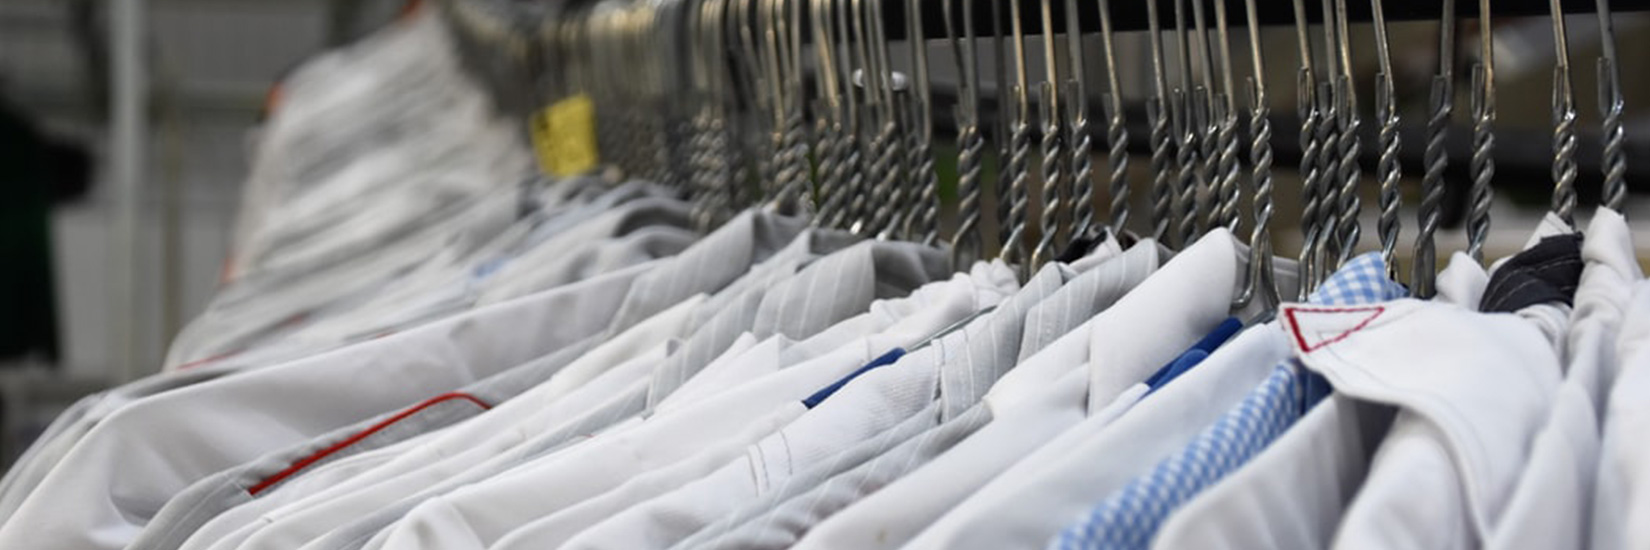 6 Tips for Finding the Best Dry Cleaning Near You 2020